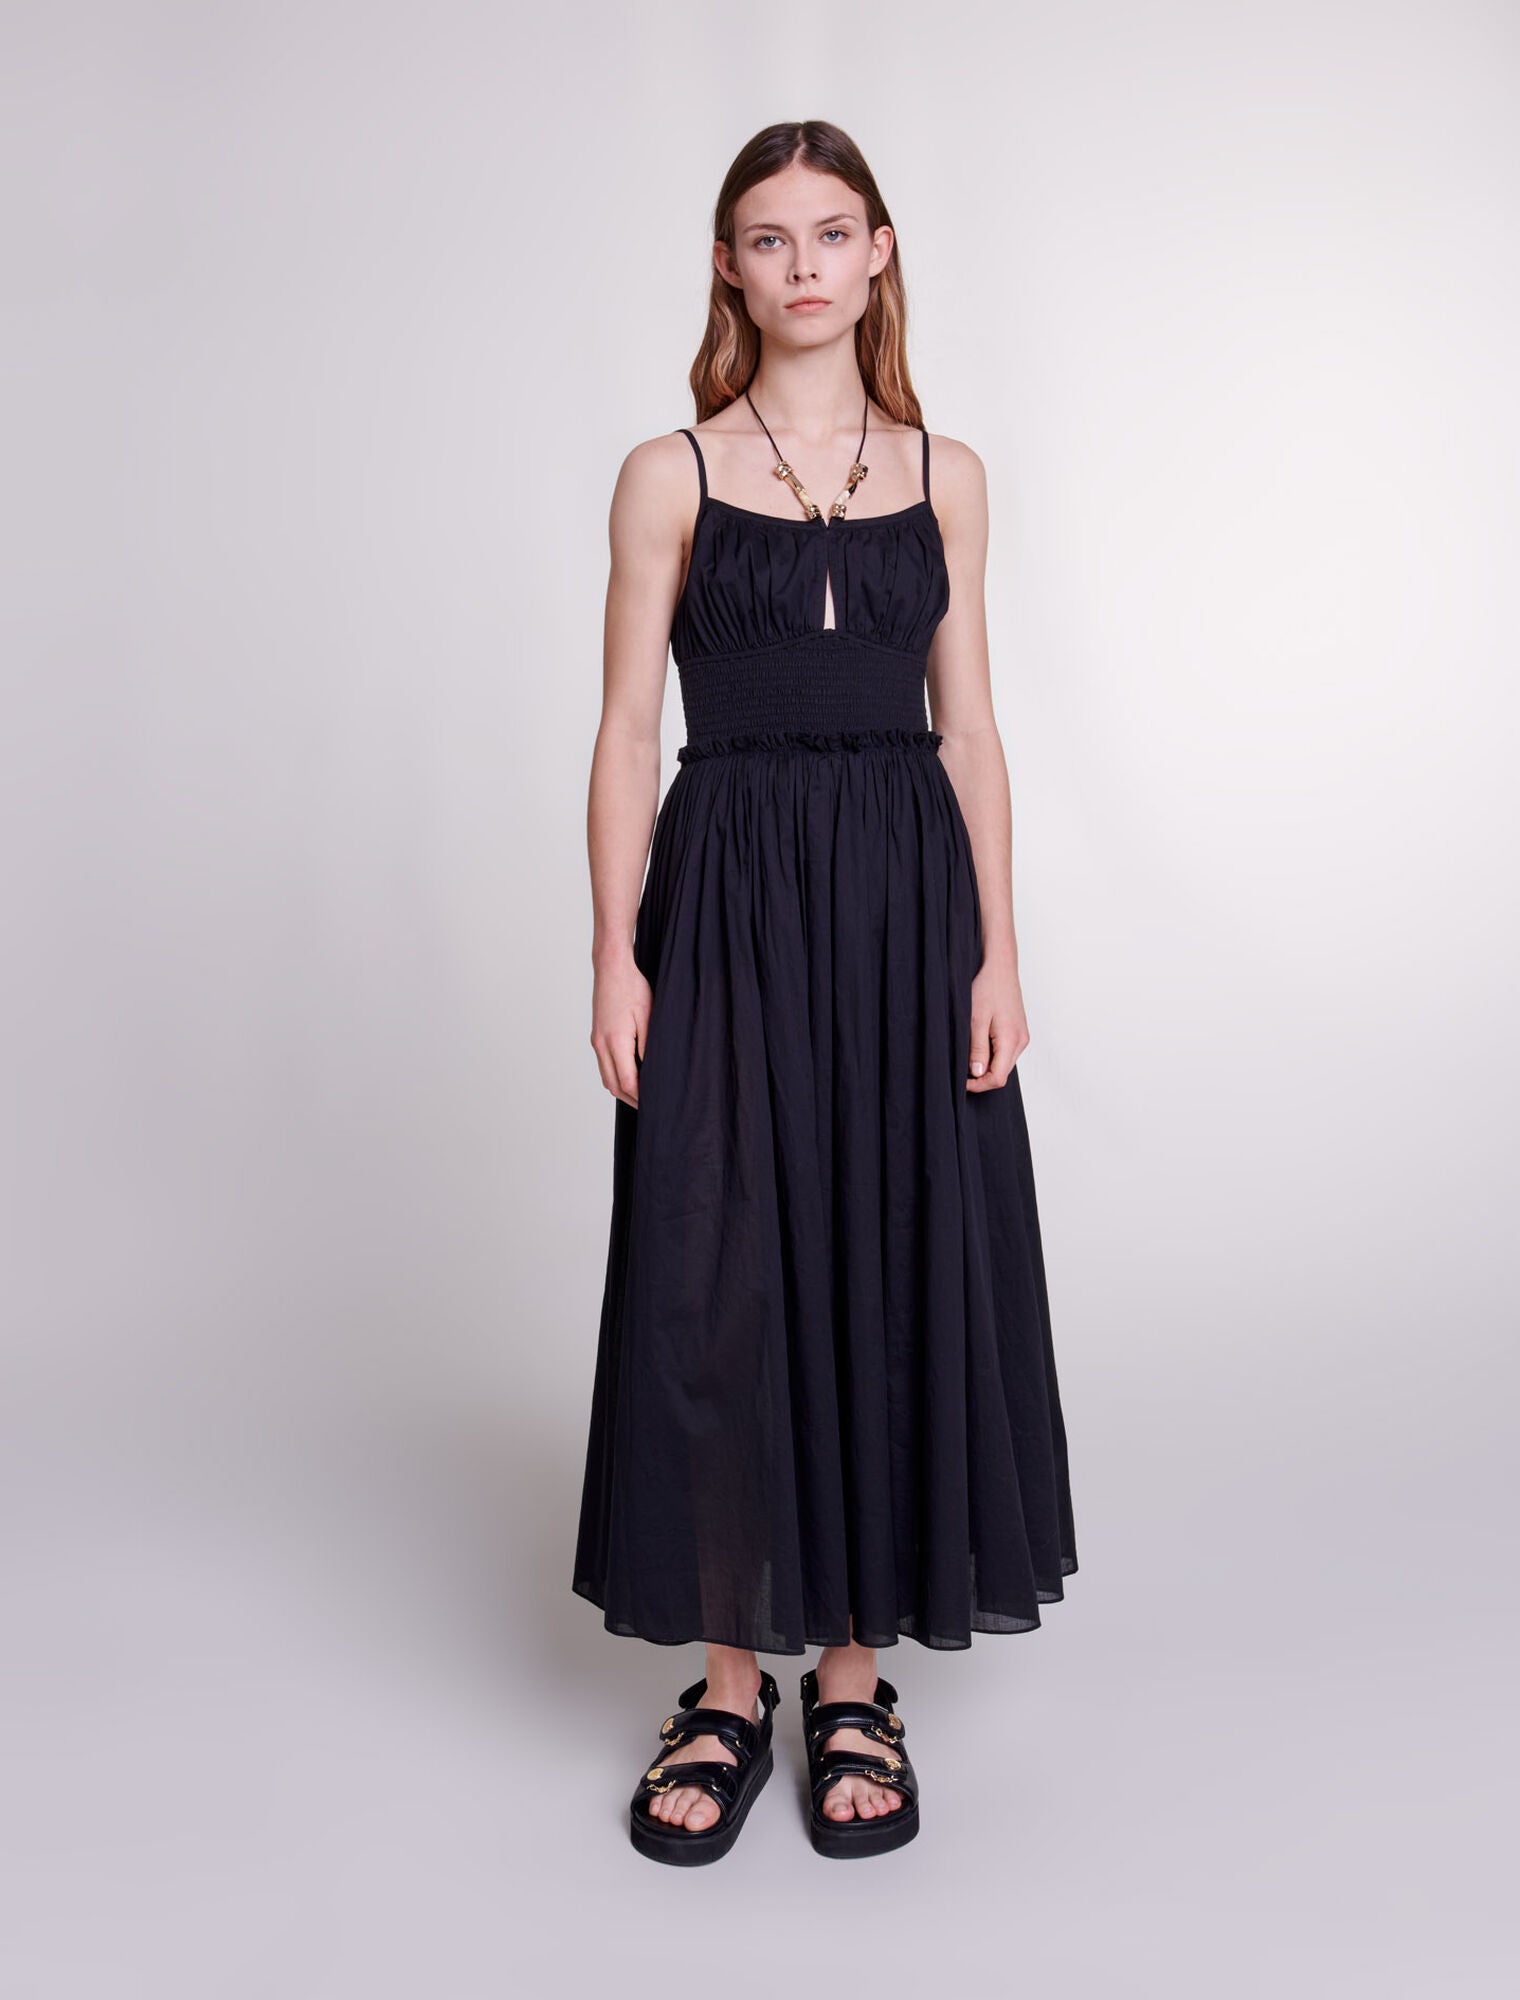 Black featured Dress with beaded ties